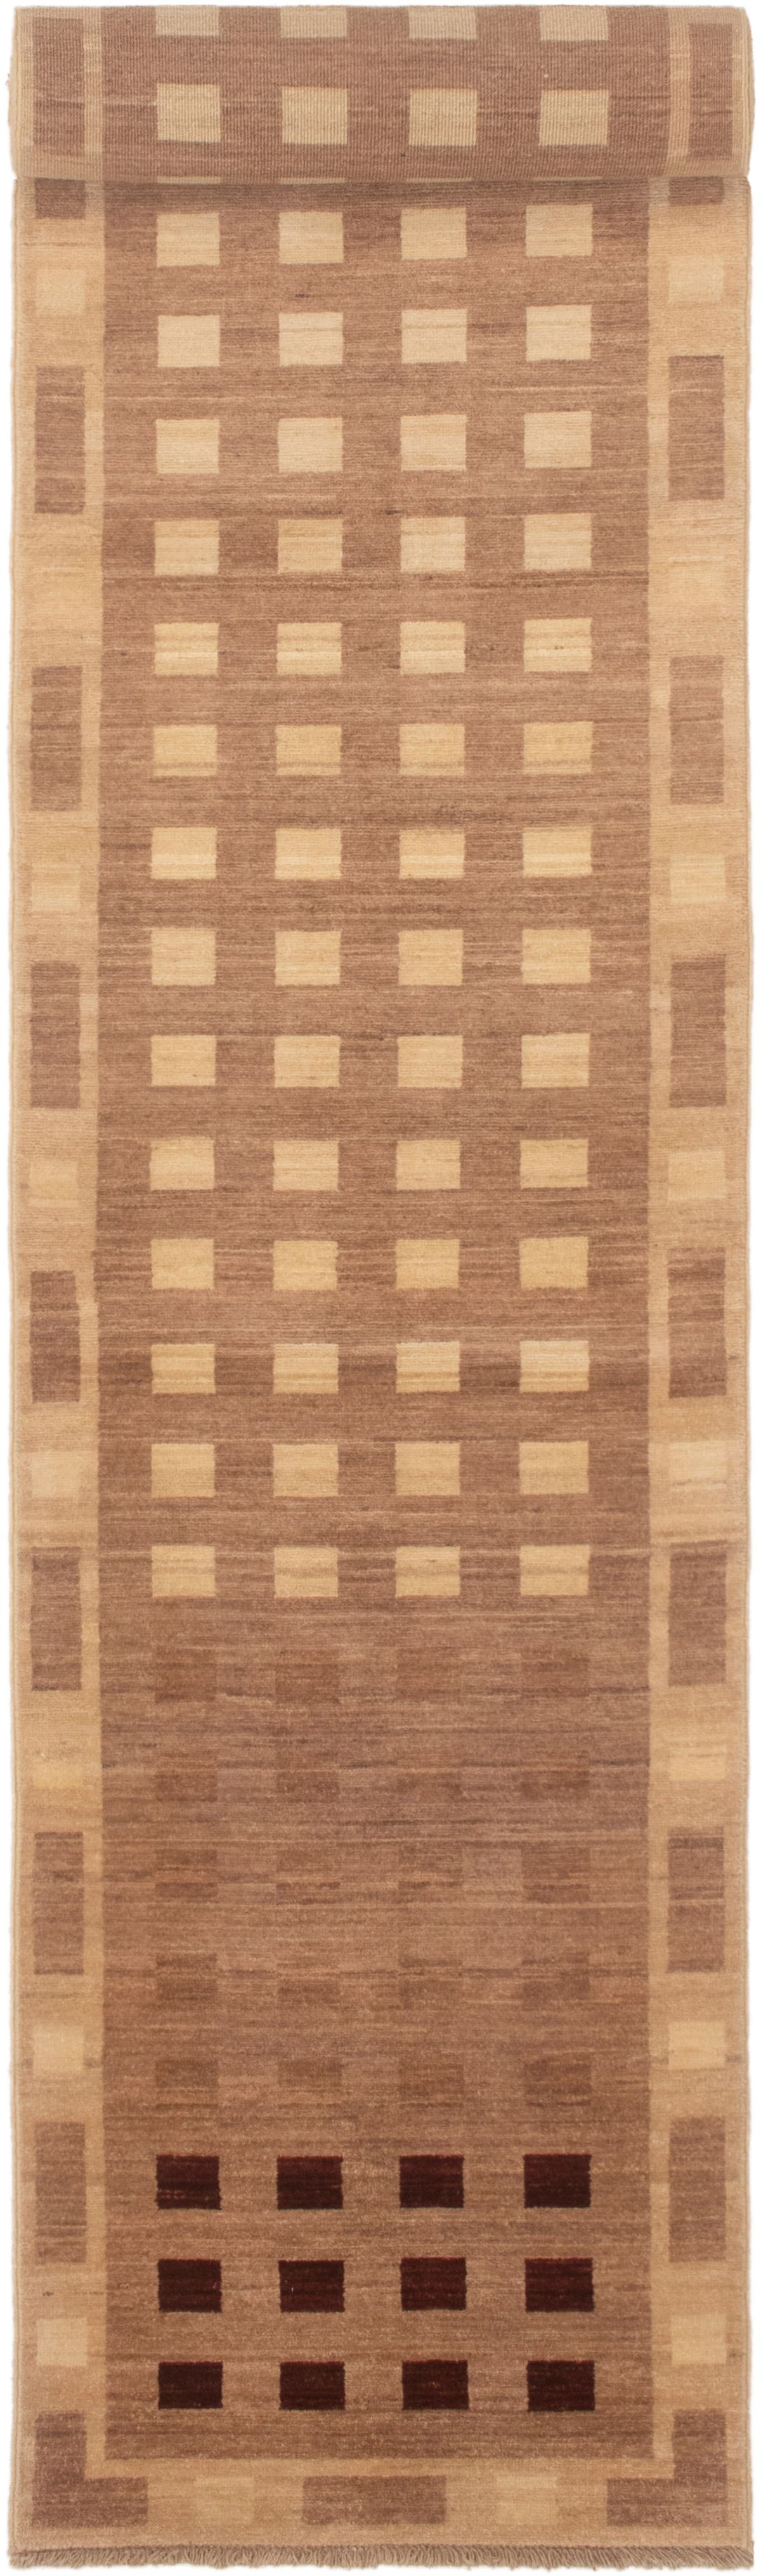 Hand-knotted Finest Ziegler Chobi Brown Wool Rug 2'5" x 19'2" Size: 2'5" x 19'2"  